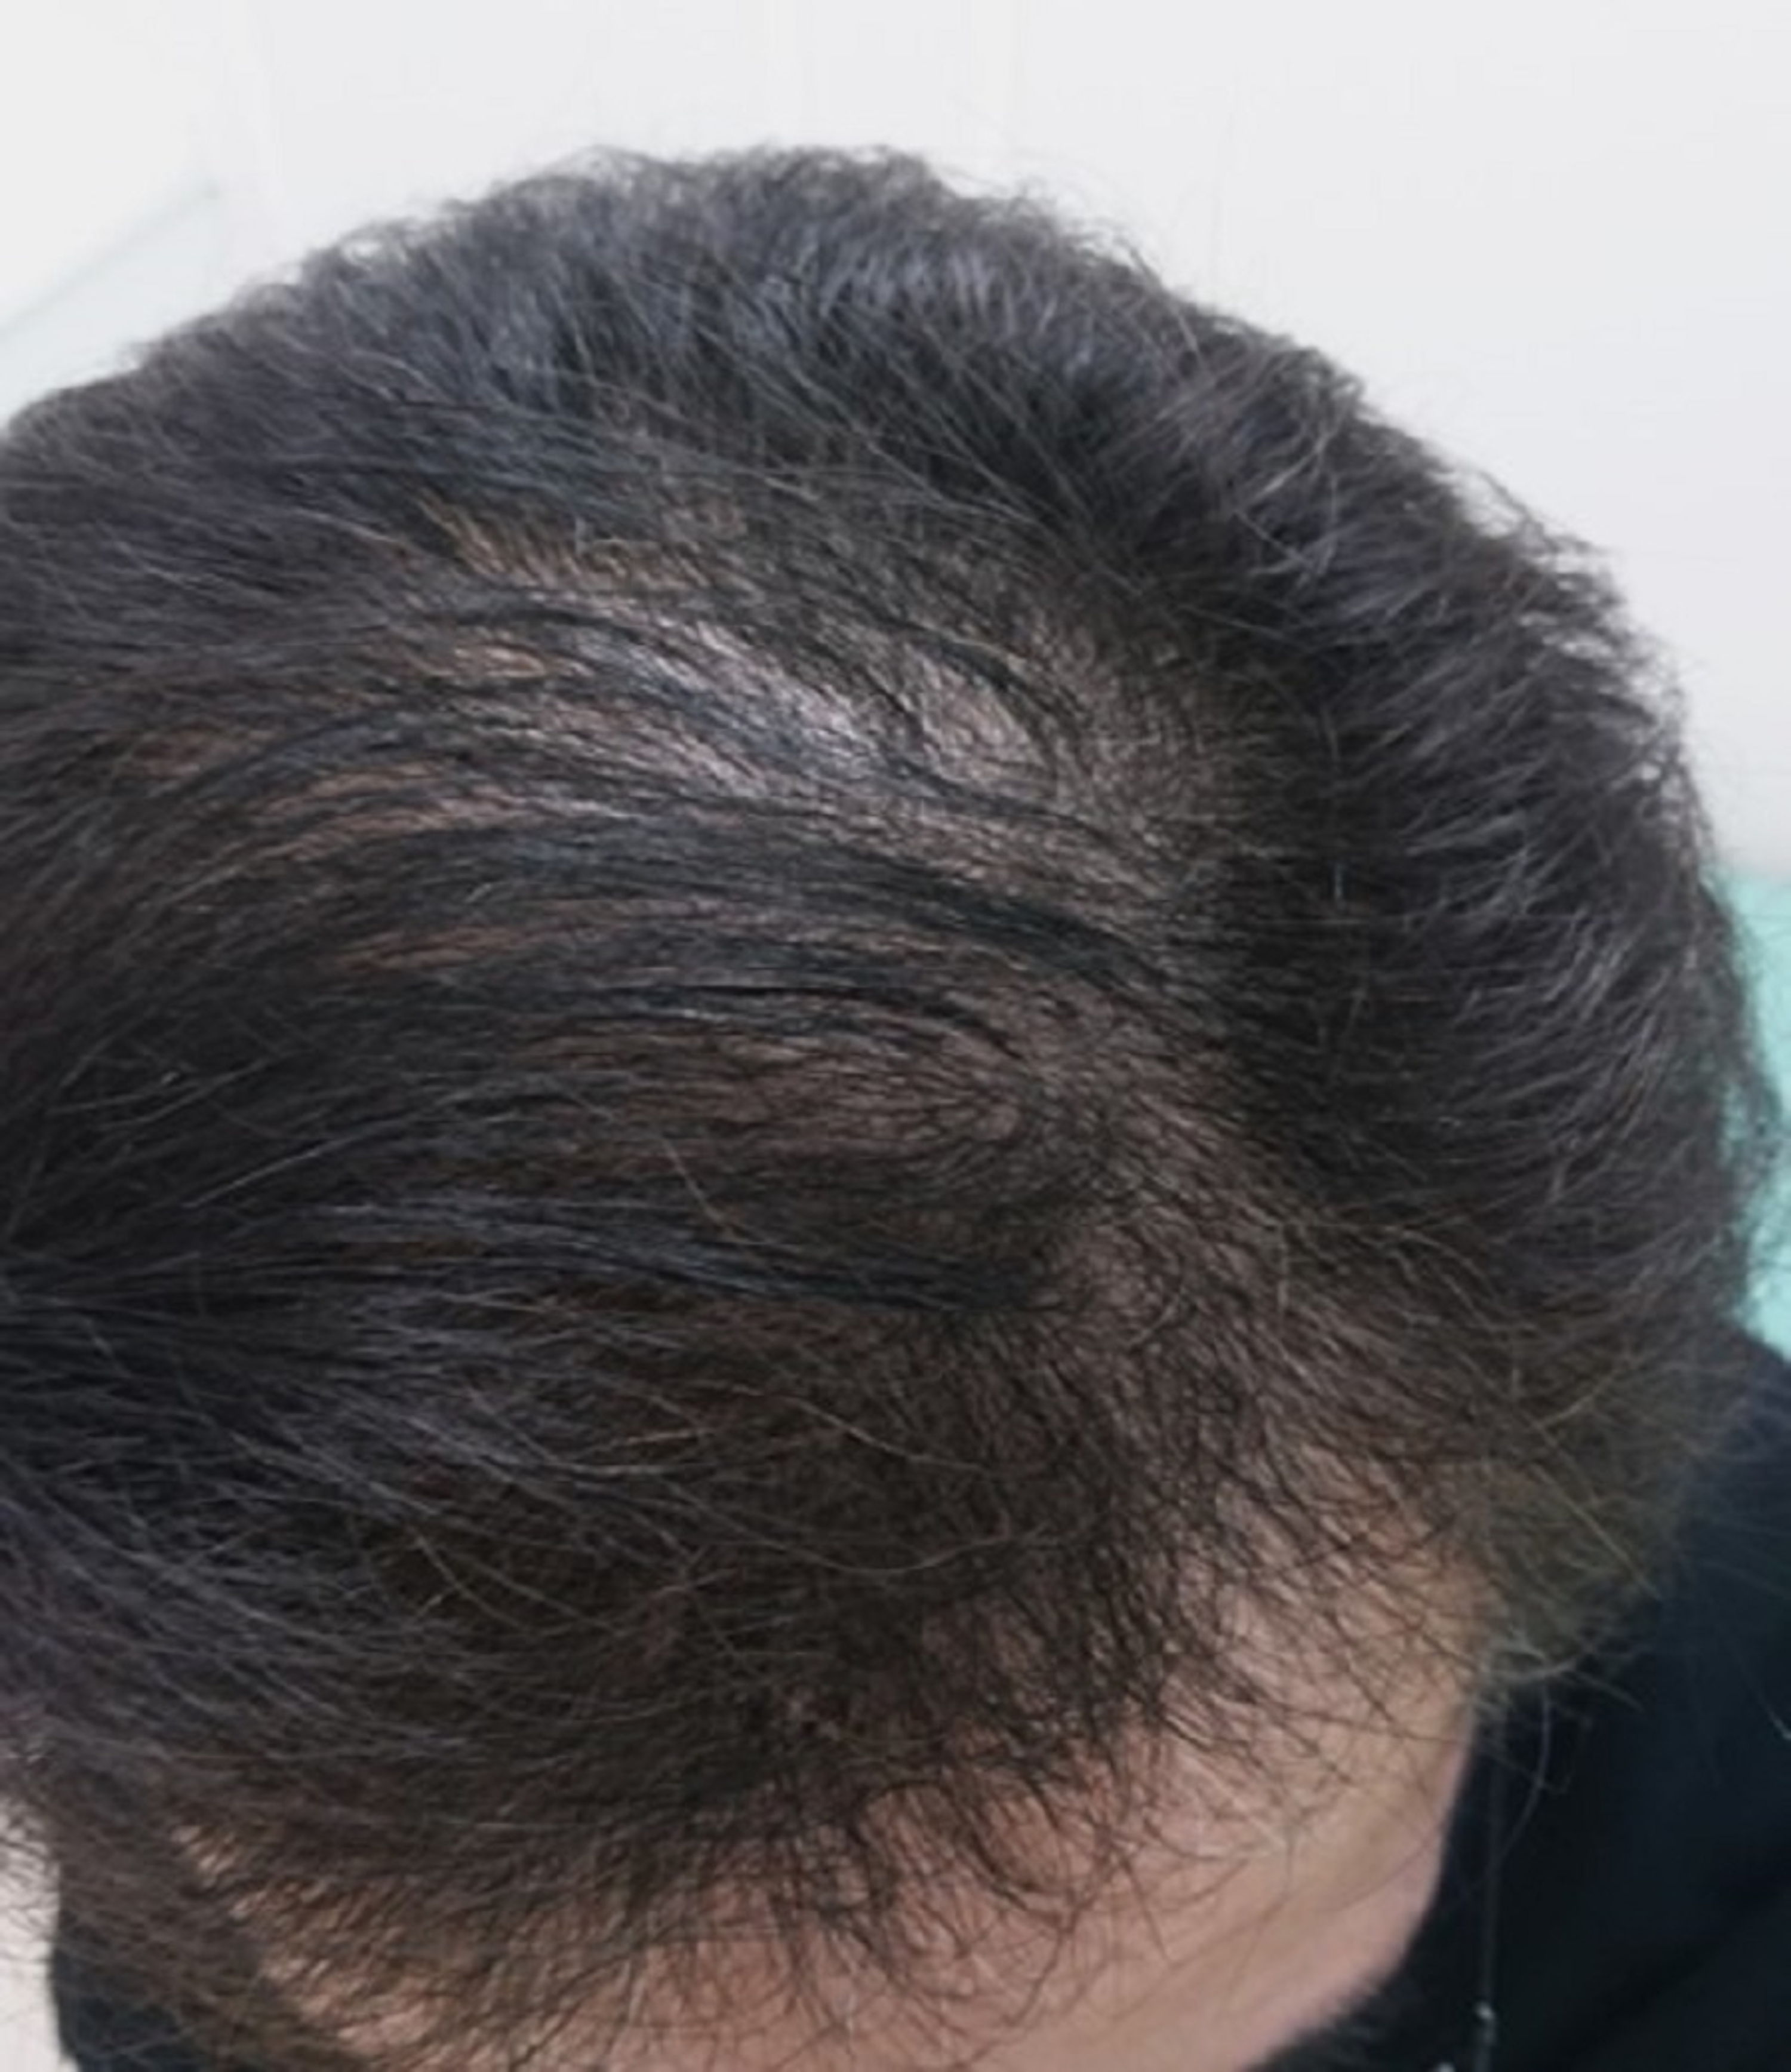 Cureus | Recovery From Alopecia After COVID-19 | Article